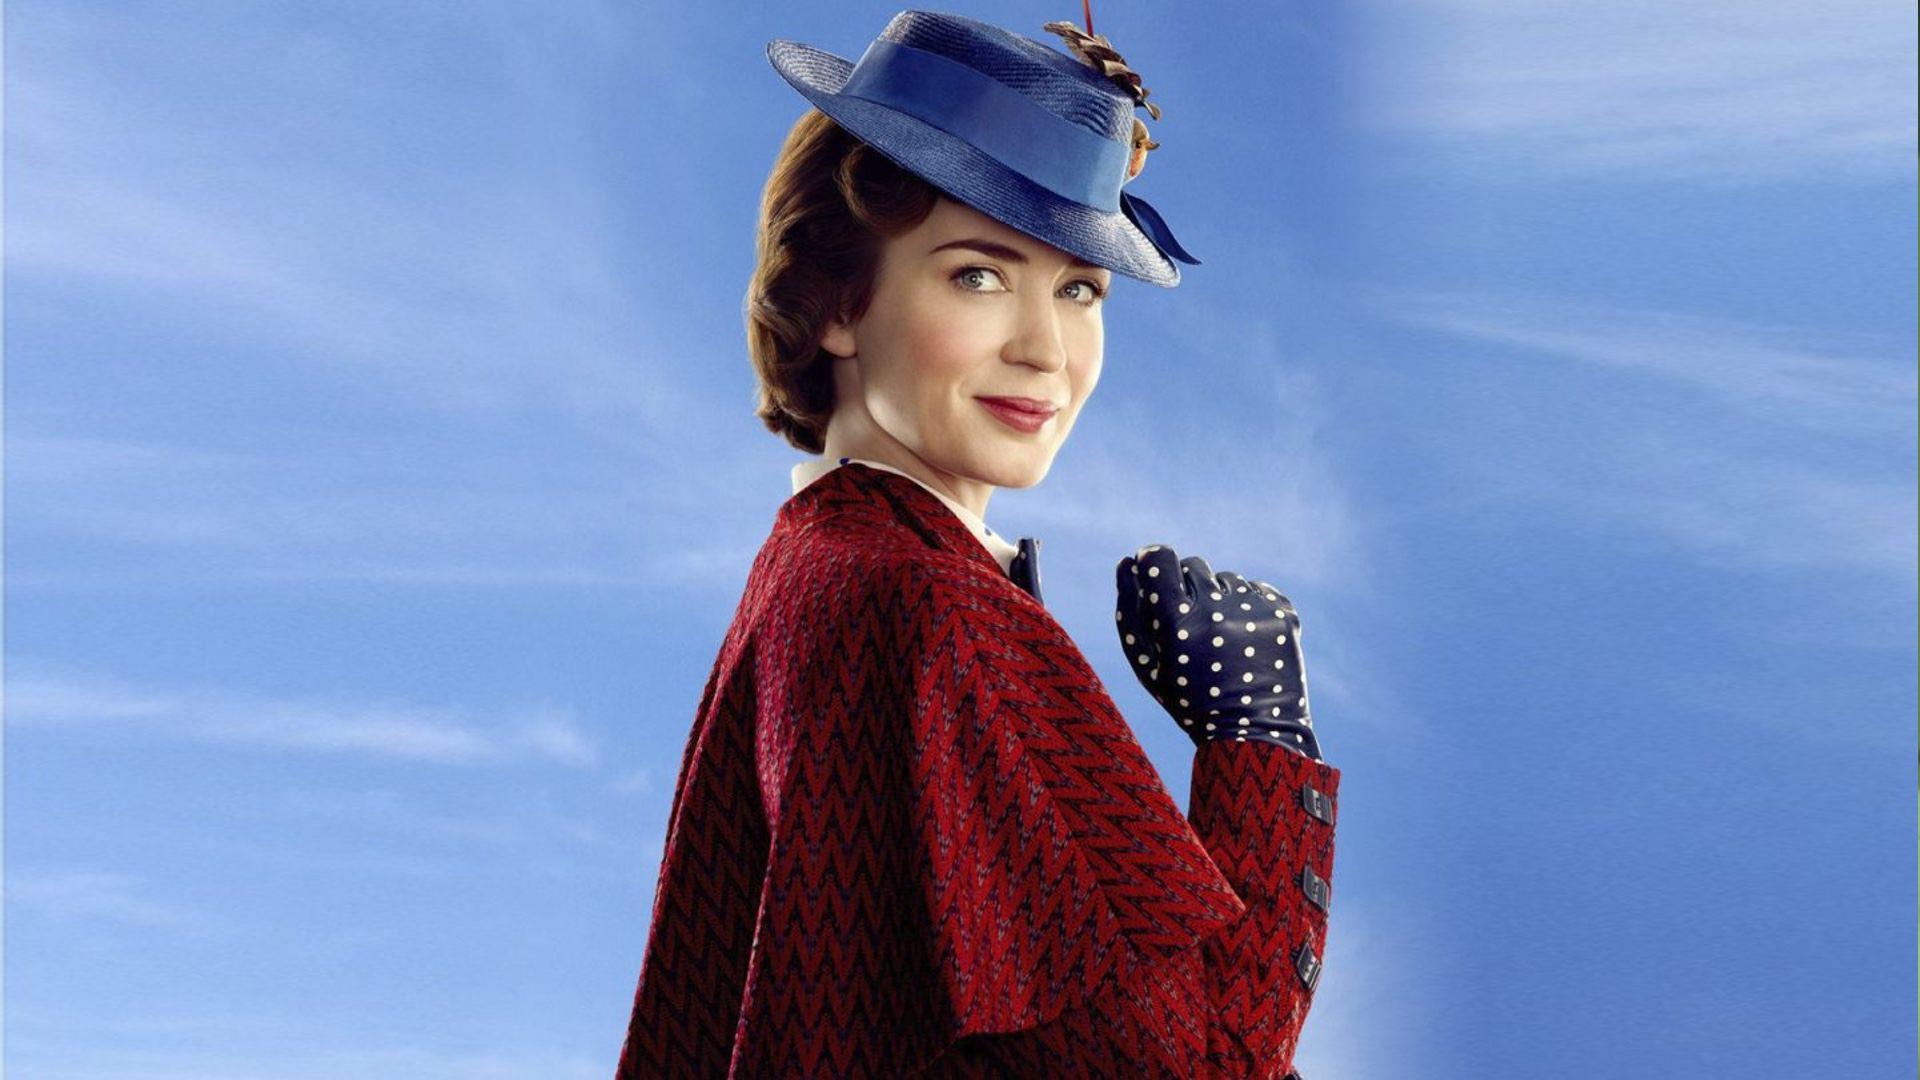 Best Wallpaper Of Emily Blunt In The 2018 Mary Poppins Movie